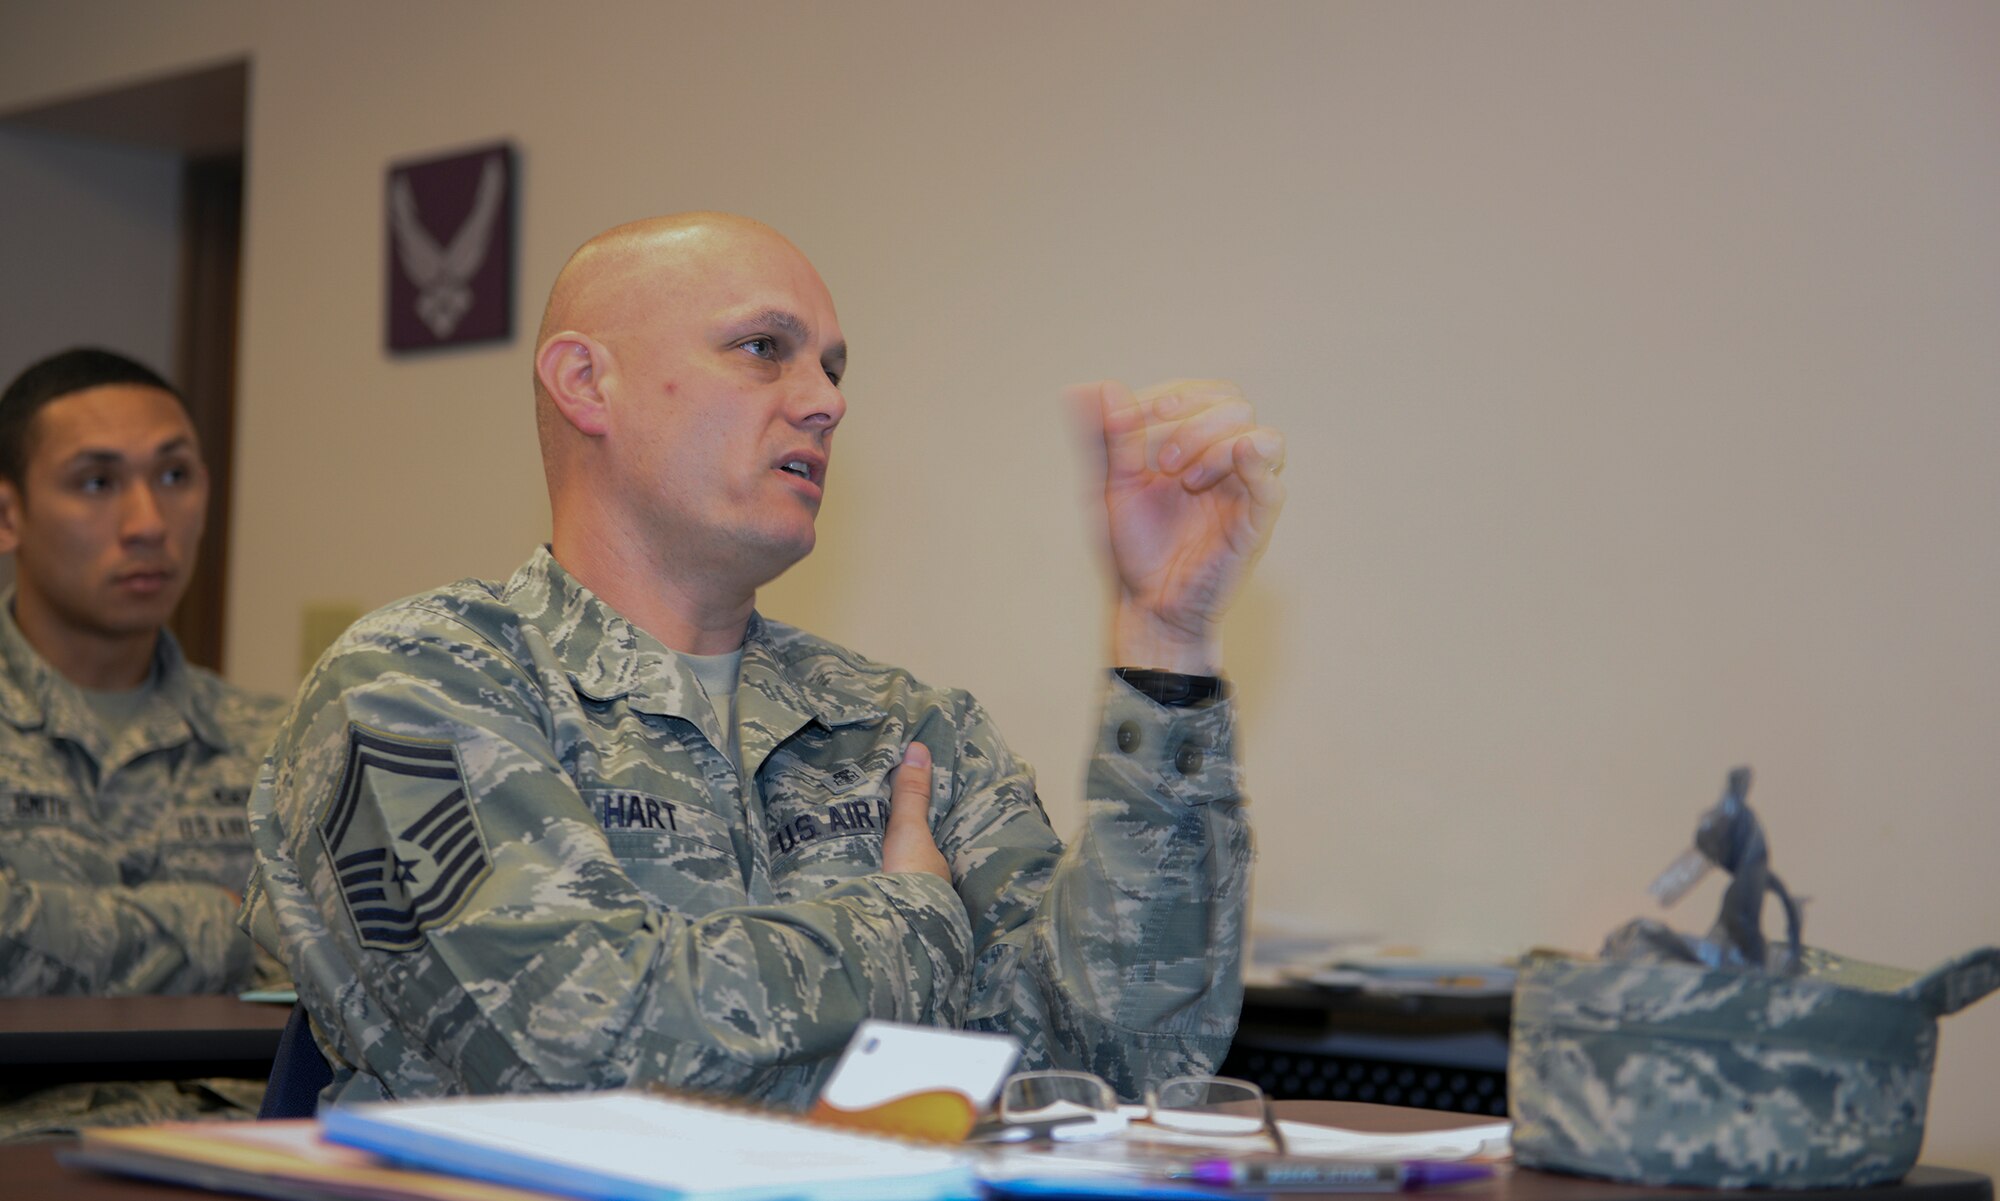 U.S. Air Force Senior Master Sgt. Stephen Hart, 23d Medical Operations Squadron superintendent, asks a question during a Smooth Move briefing March 11, 2015, at Moody Air Force Base, Ga. Hart asked about changes to the Defense Personal Property System that now require Airmen to handle their own shipment requests. (U.S. Air Force photo by Airman Greg Nash/Released)